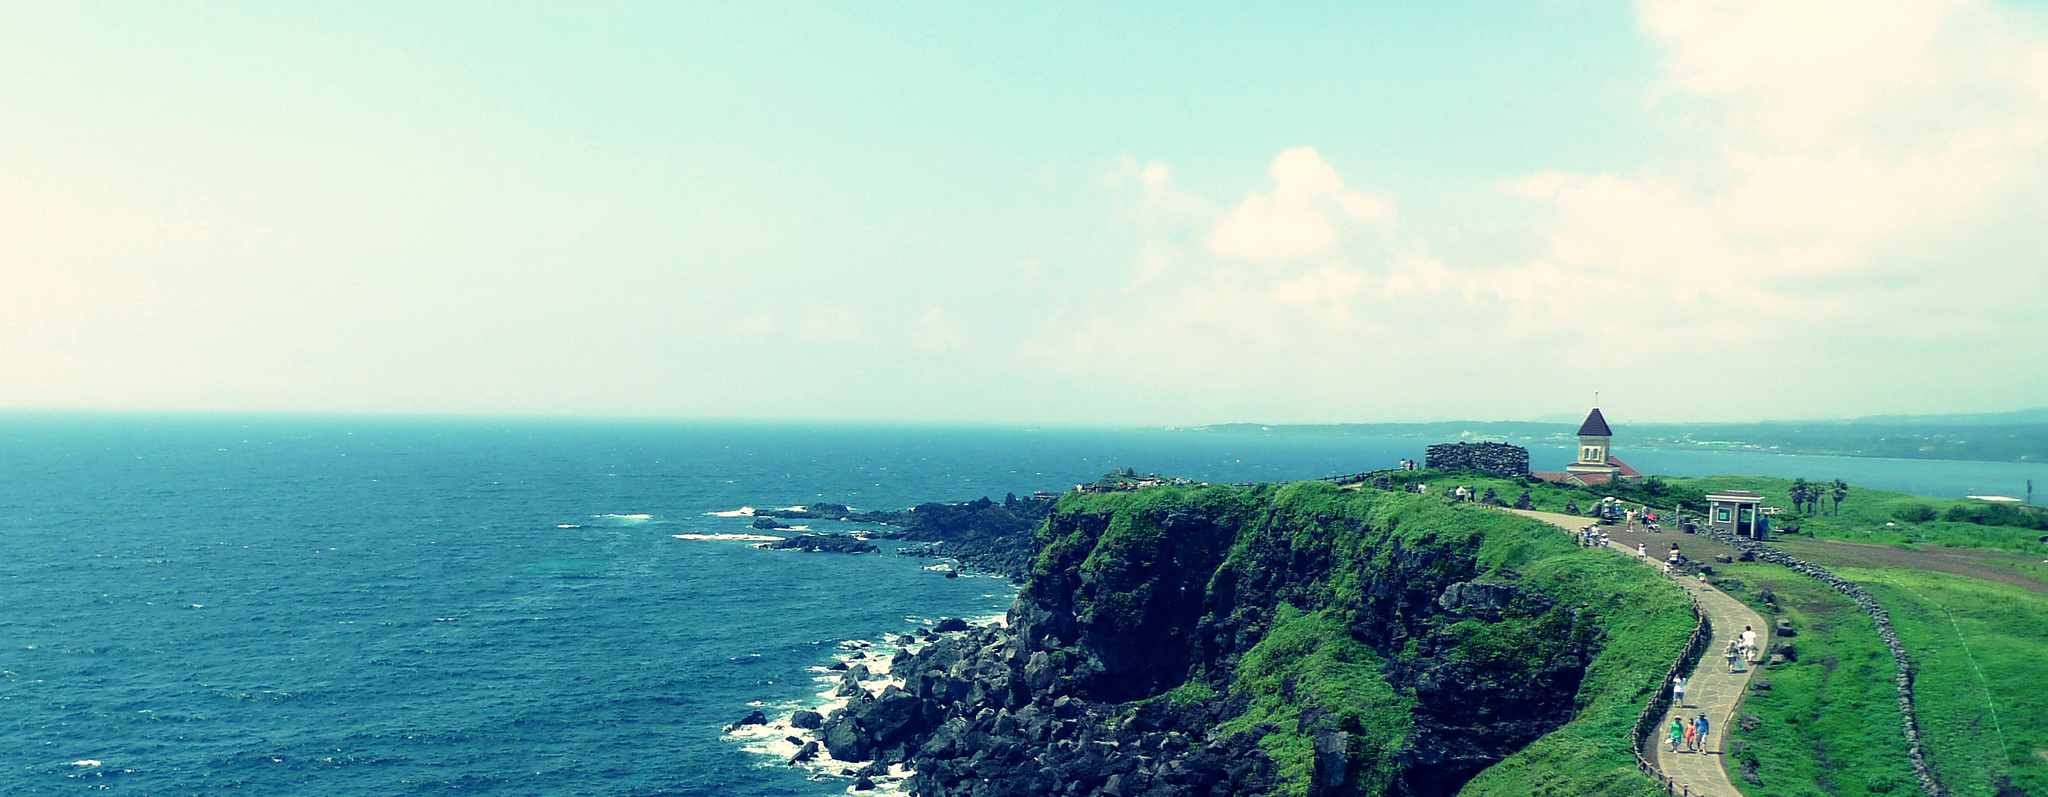 Amazing Jeju Island! Top 12 Attractions in South Korea’s Holiday Island (5)